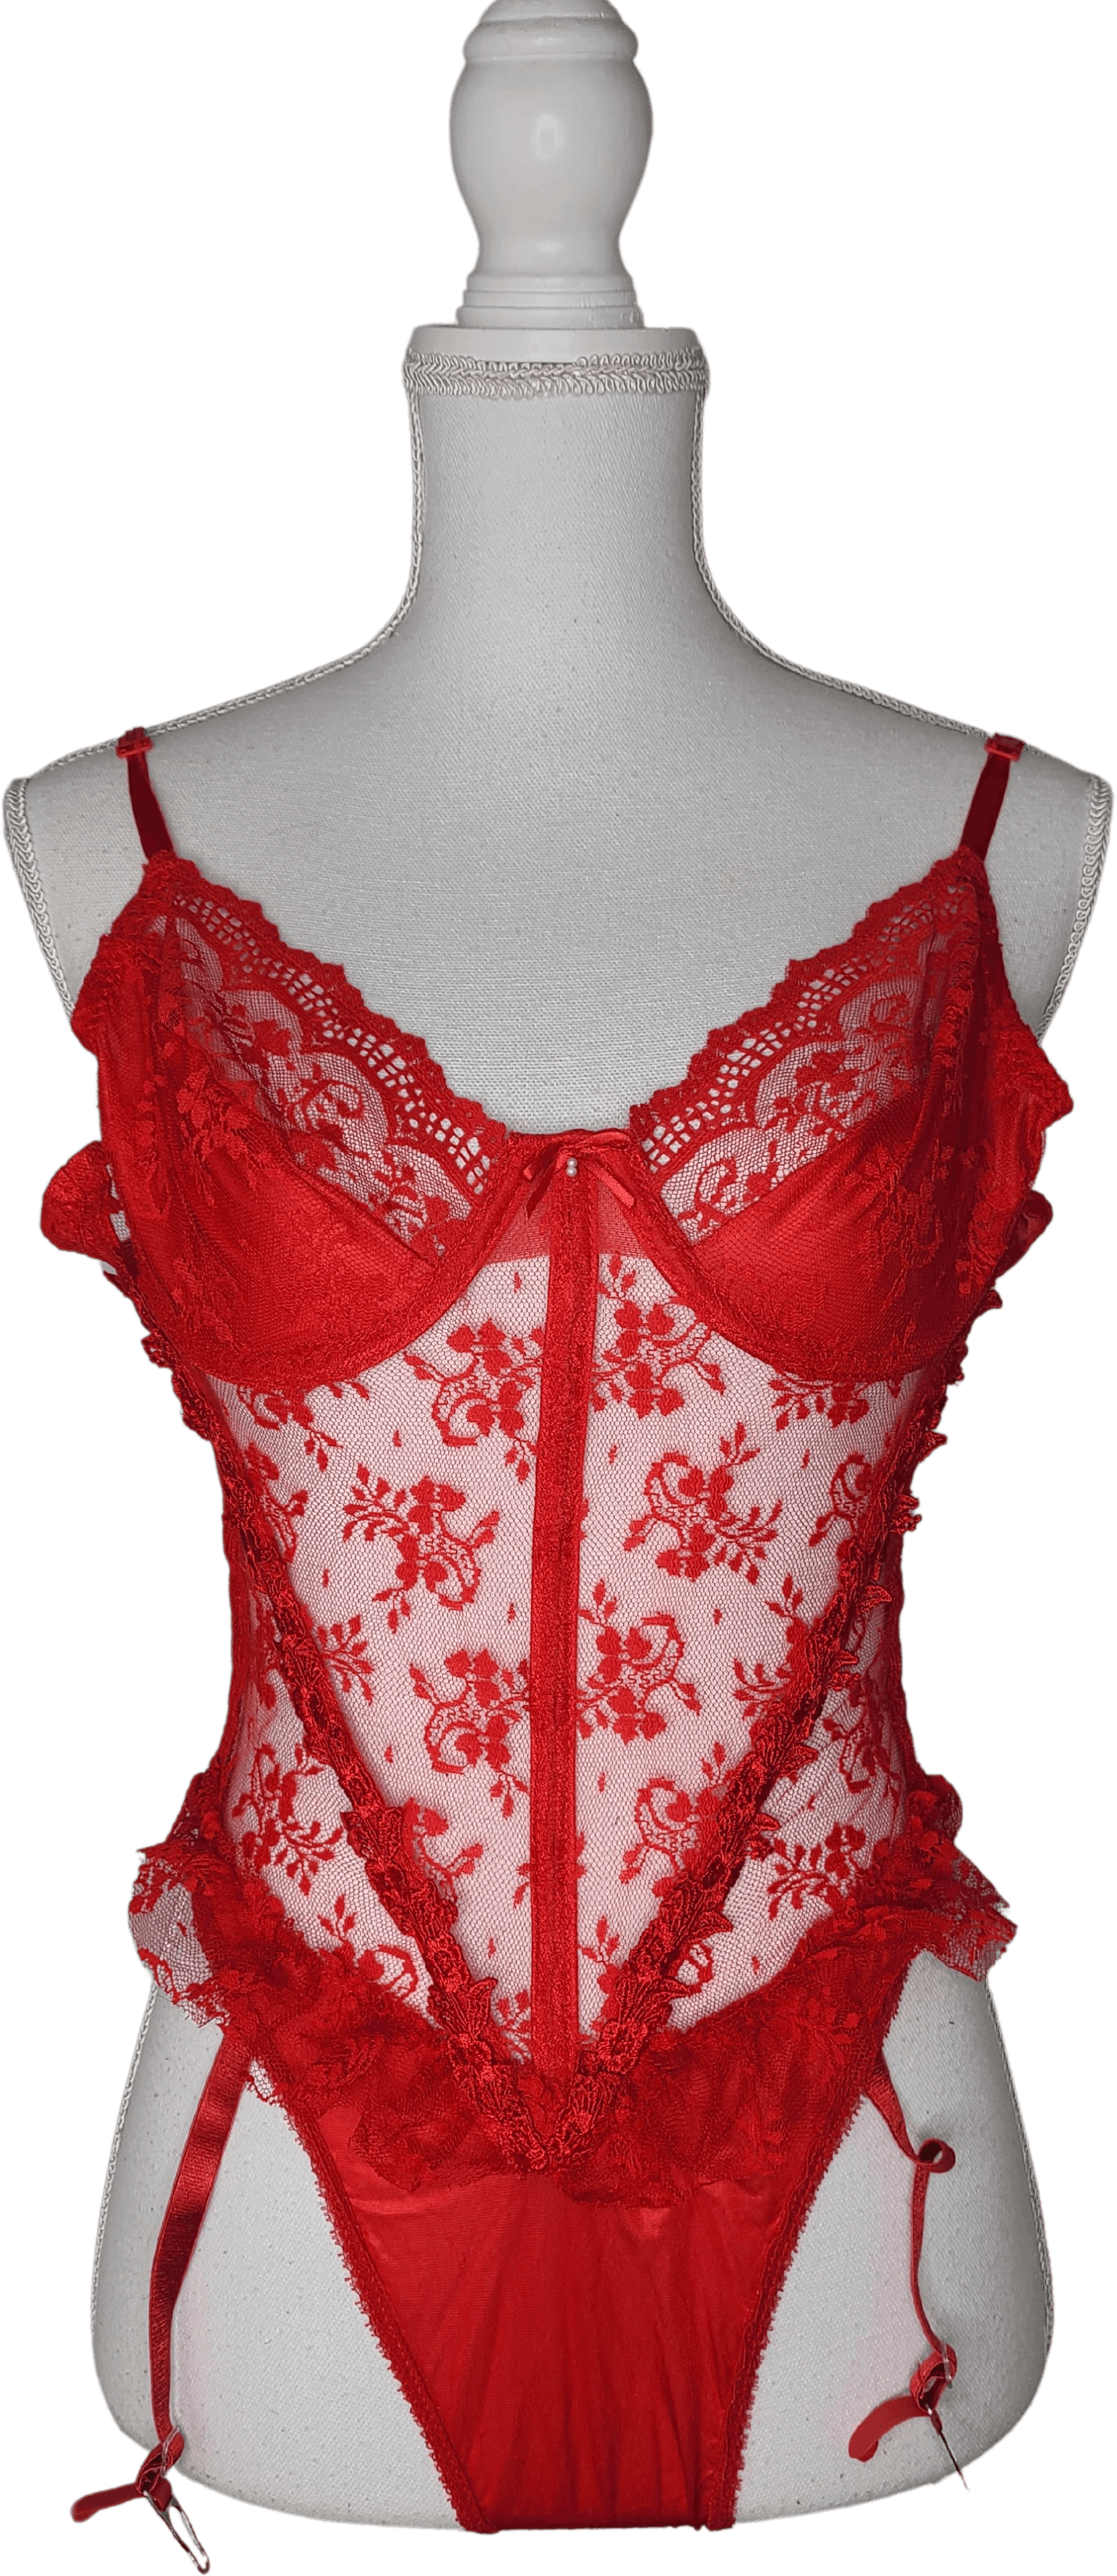 Vintage Smokin Red Lingerie Bodysuit By Shirley Of Hollywood Shop